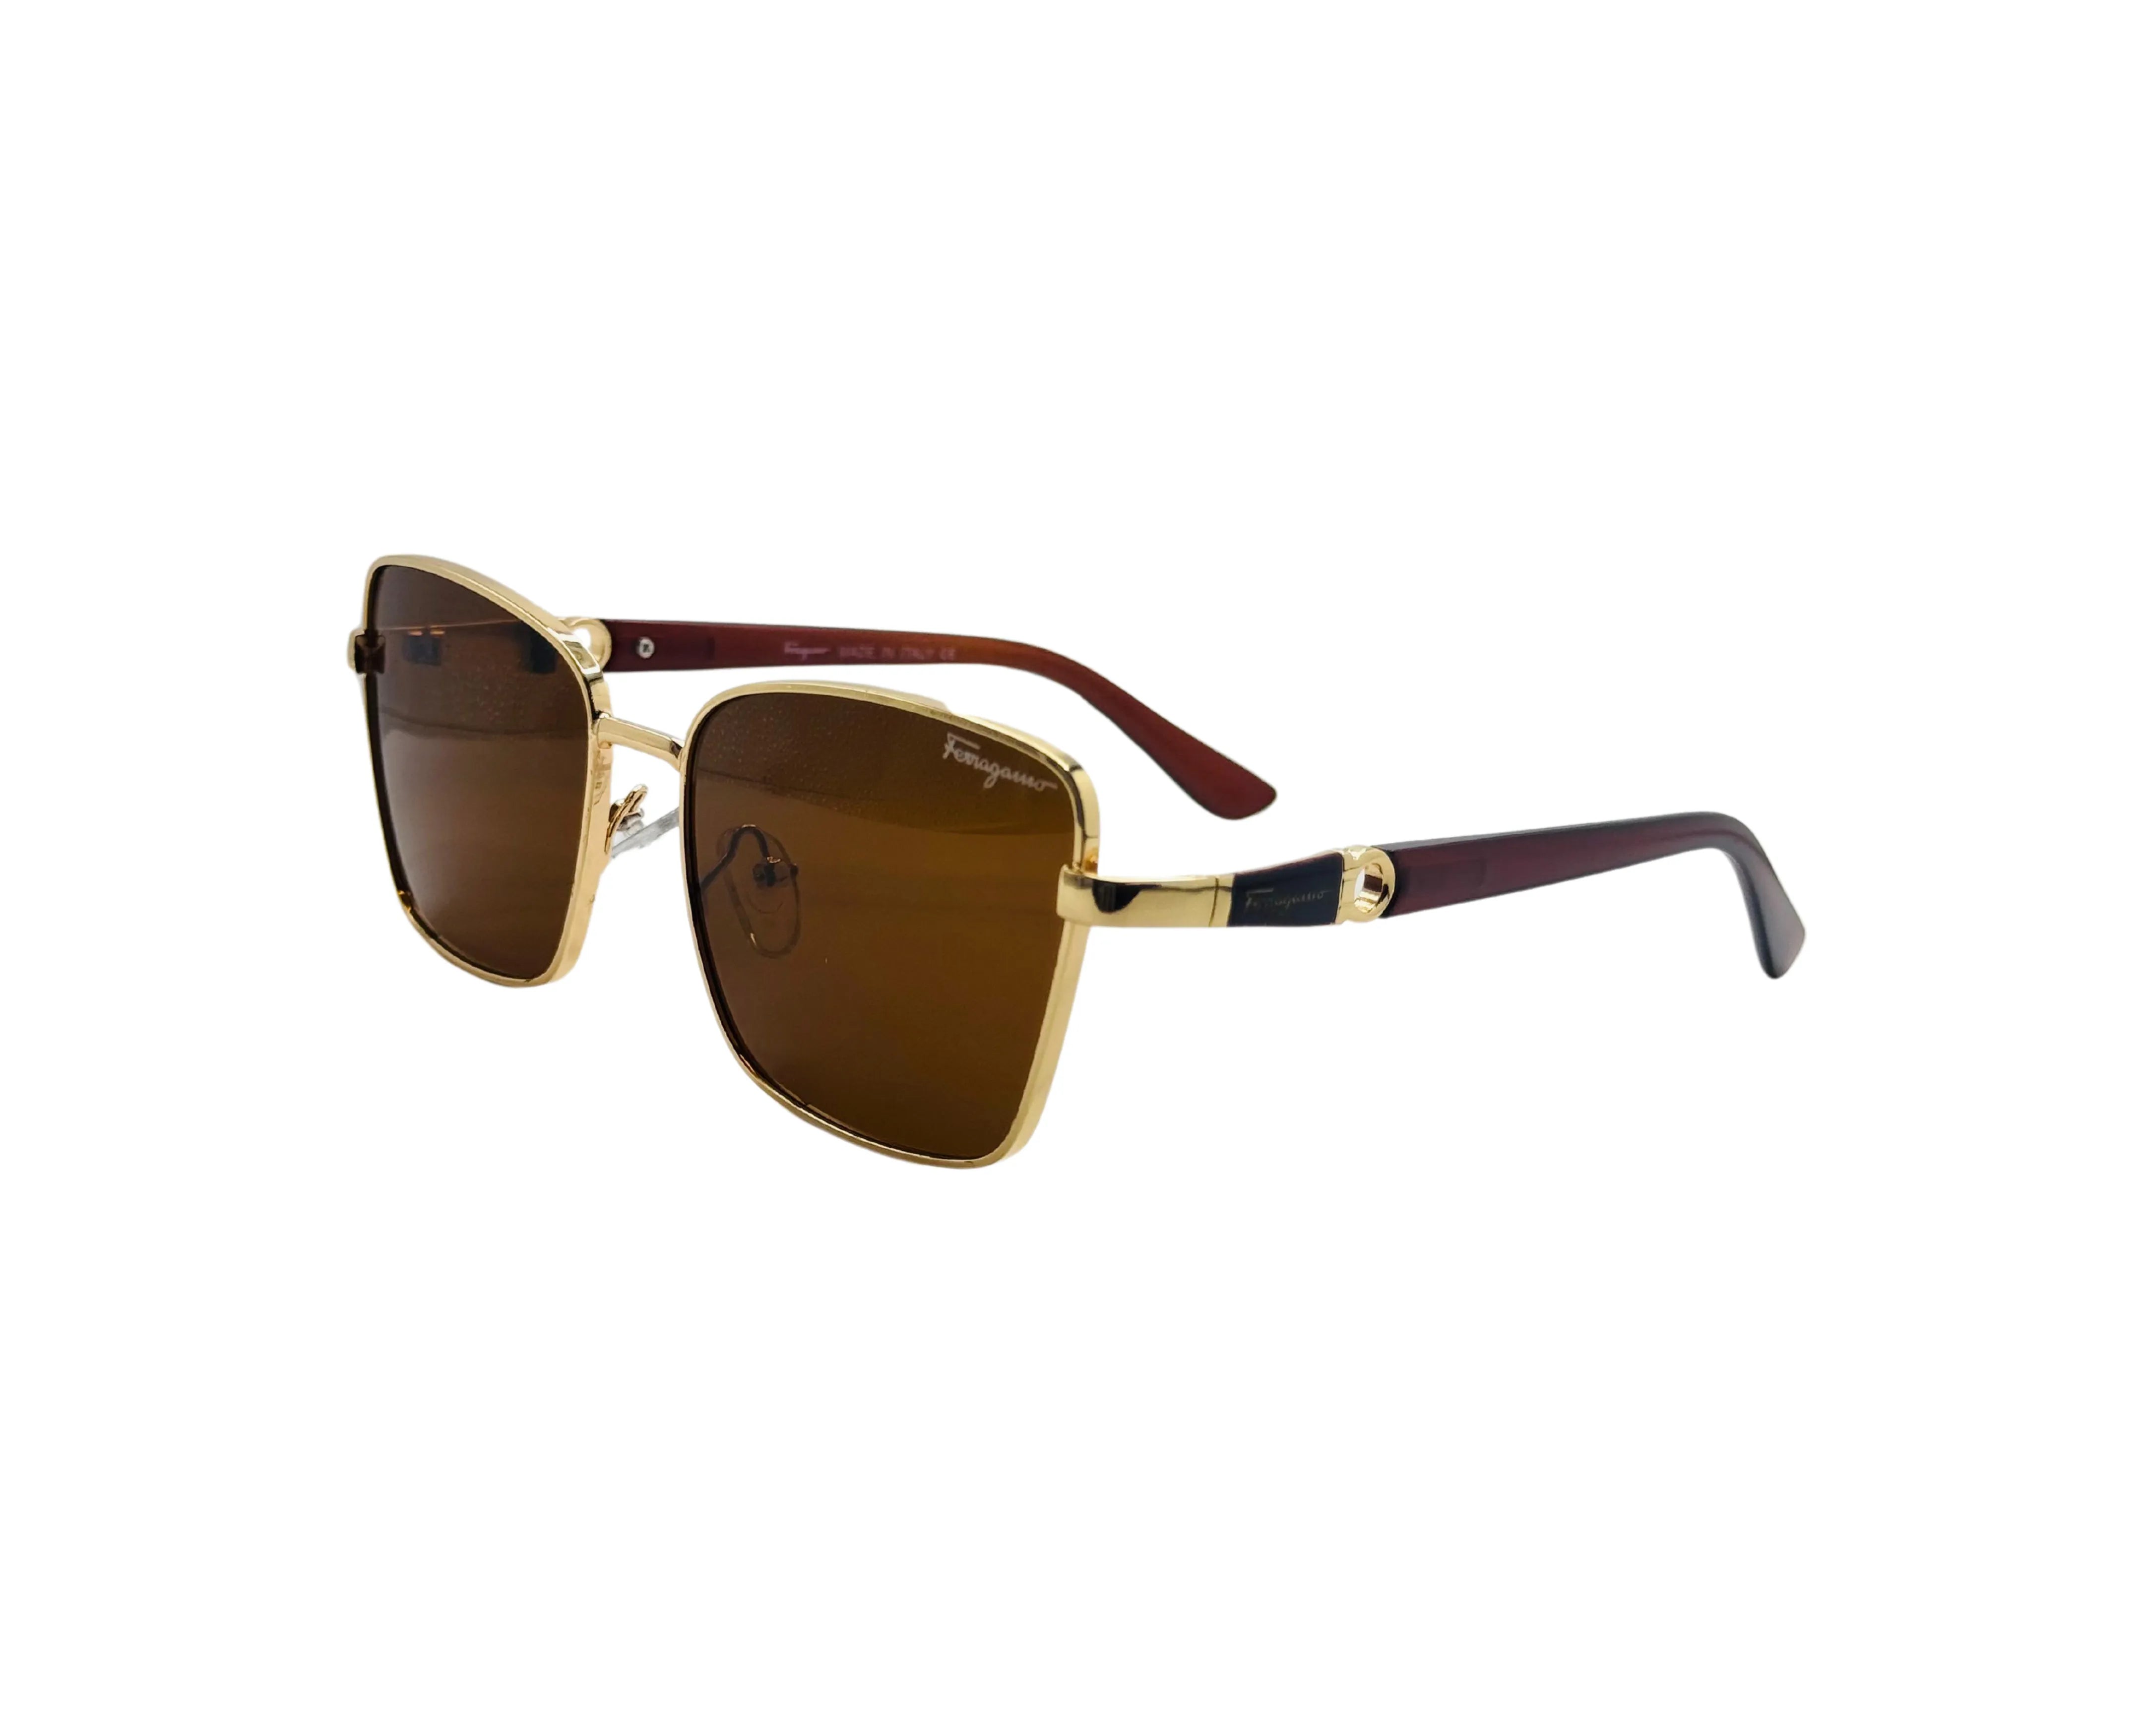 NS Deluxe - 373 - Brown - Sunglasses